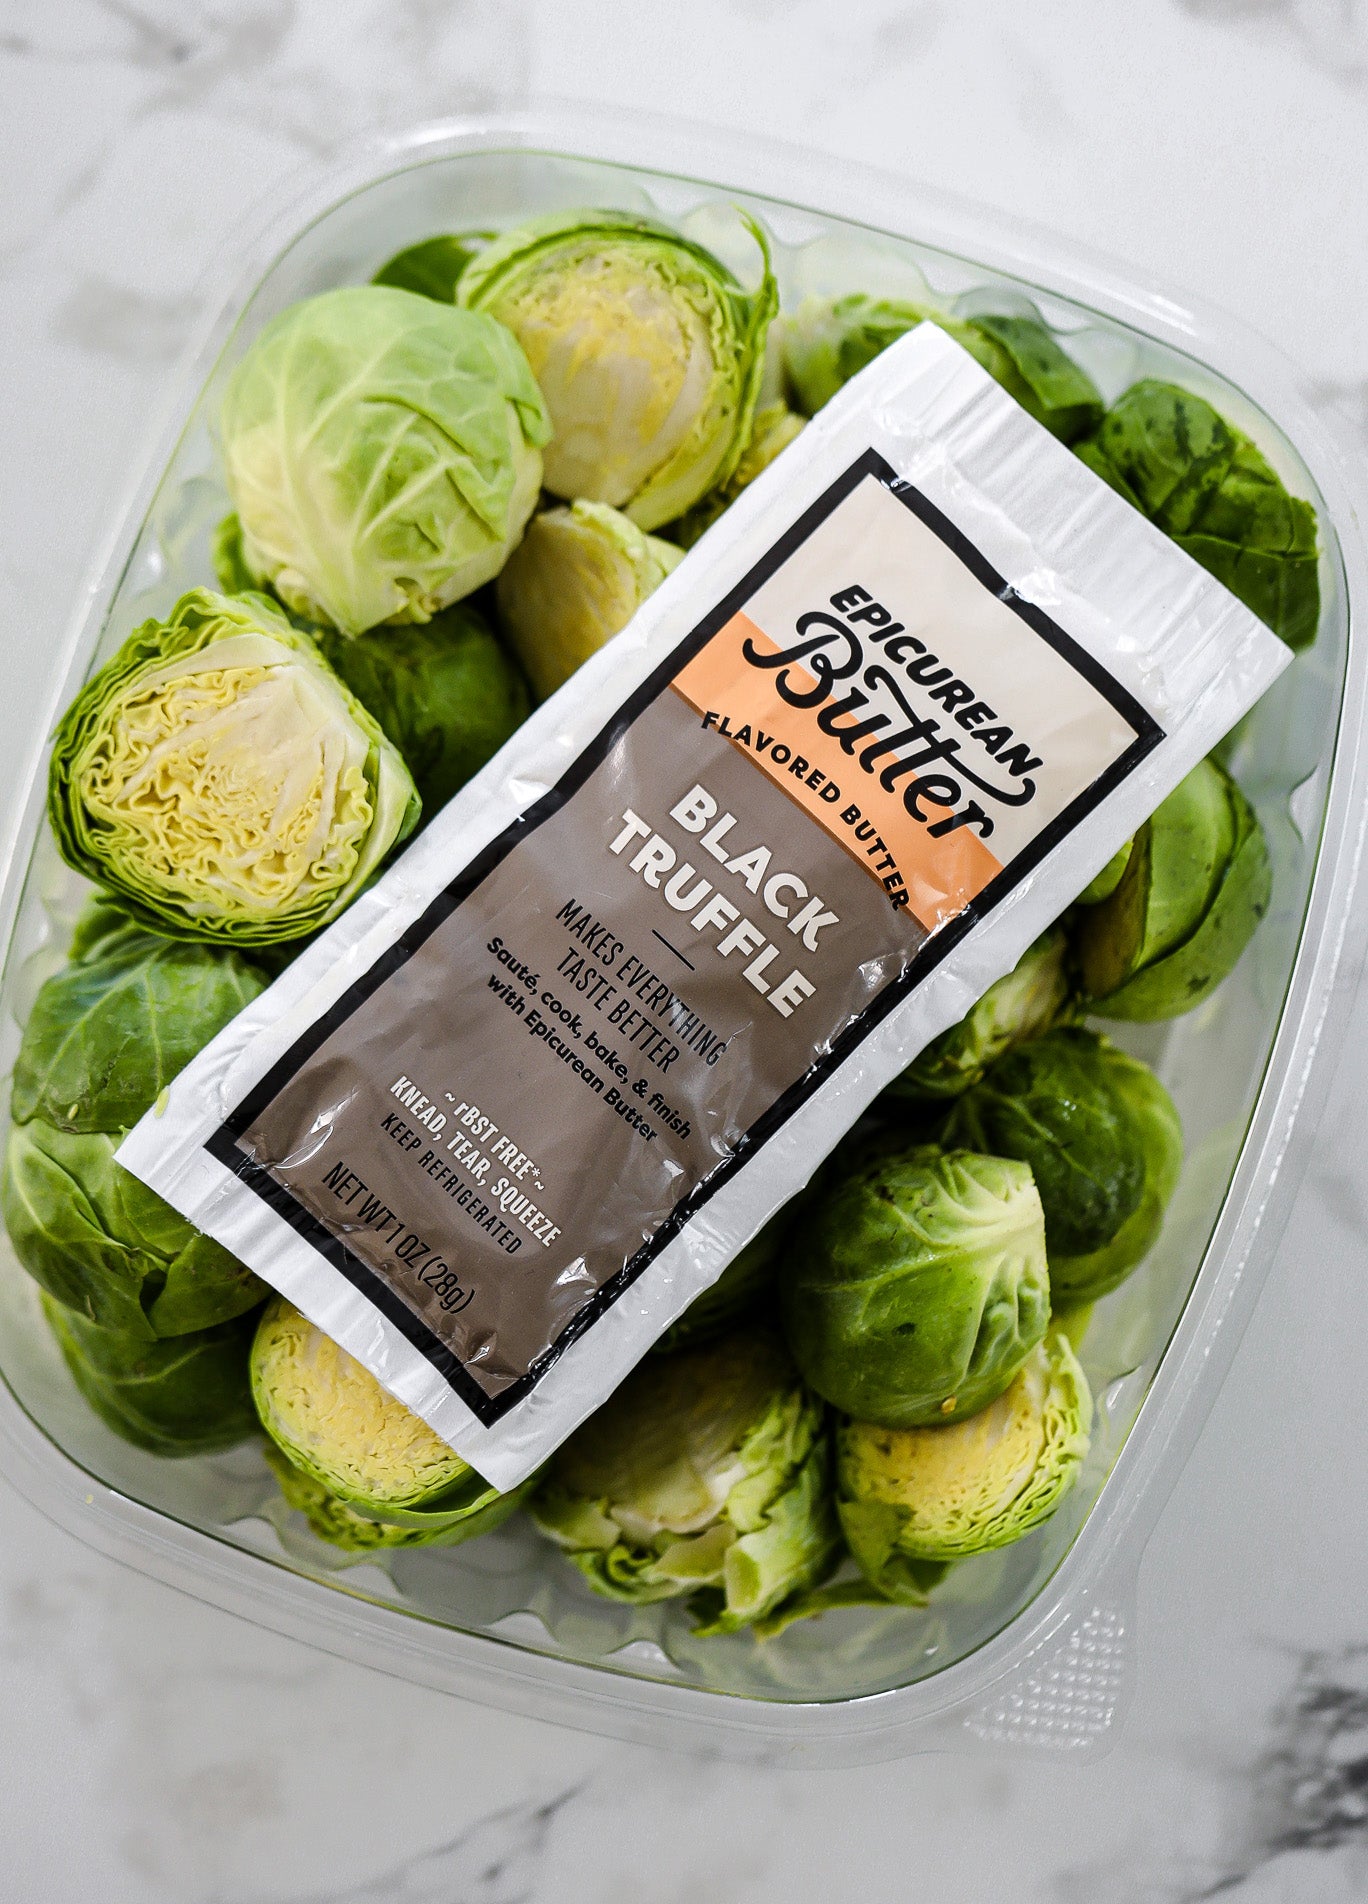 Epicurean Black Truffle 1oz with brussels sprouts